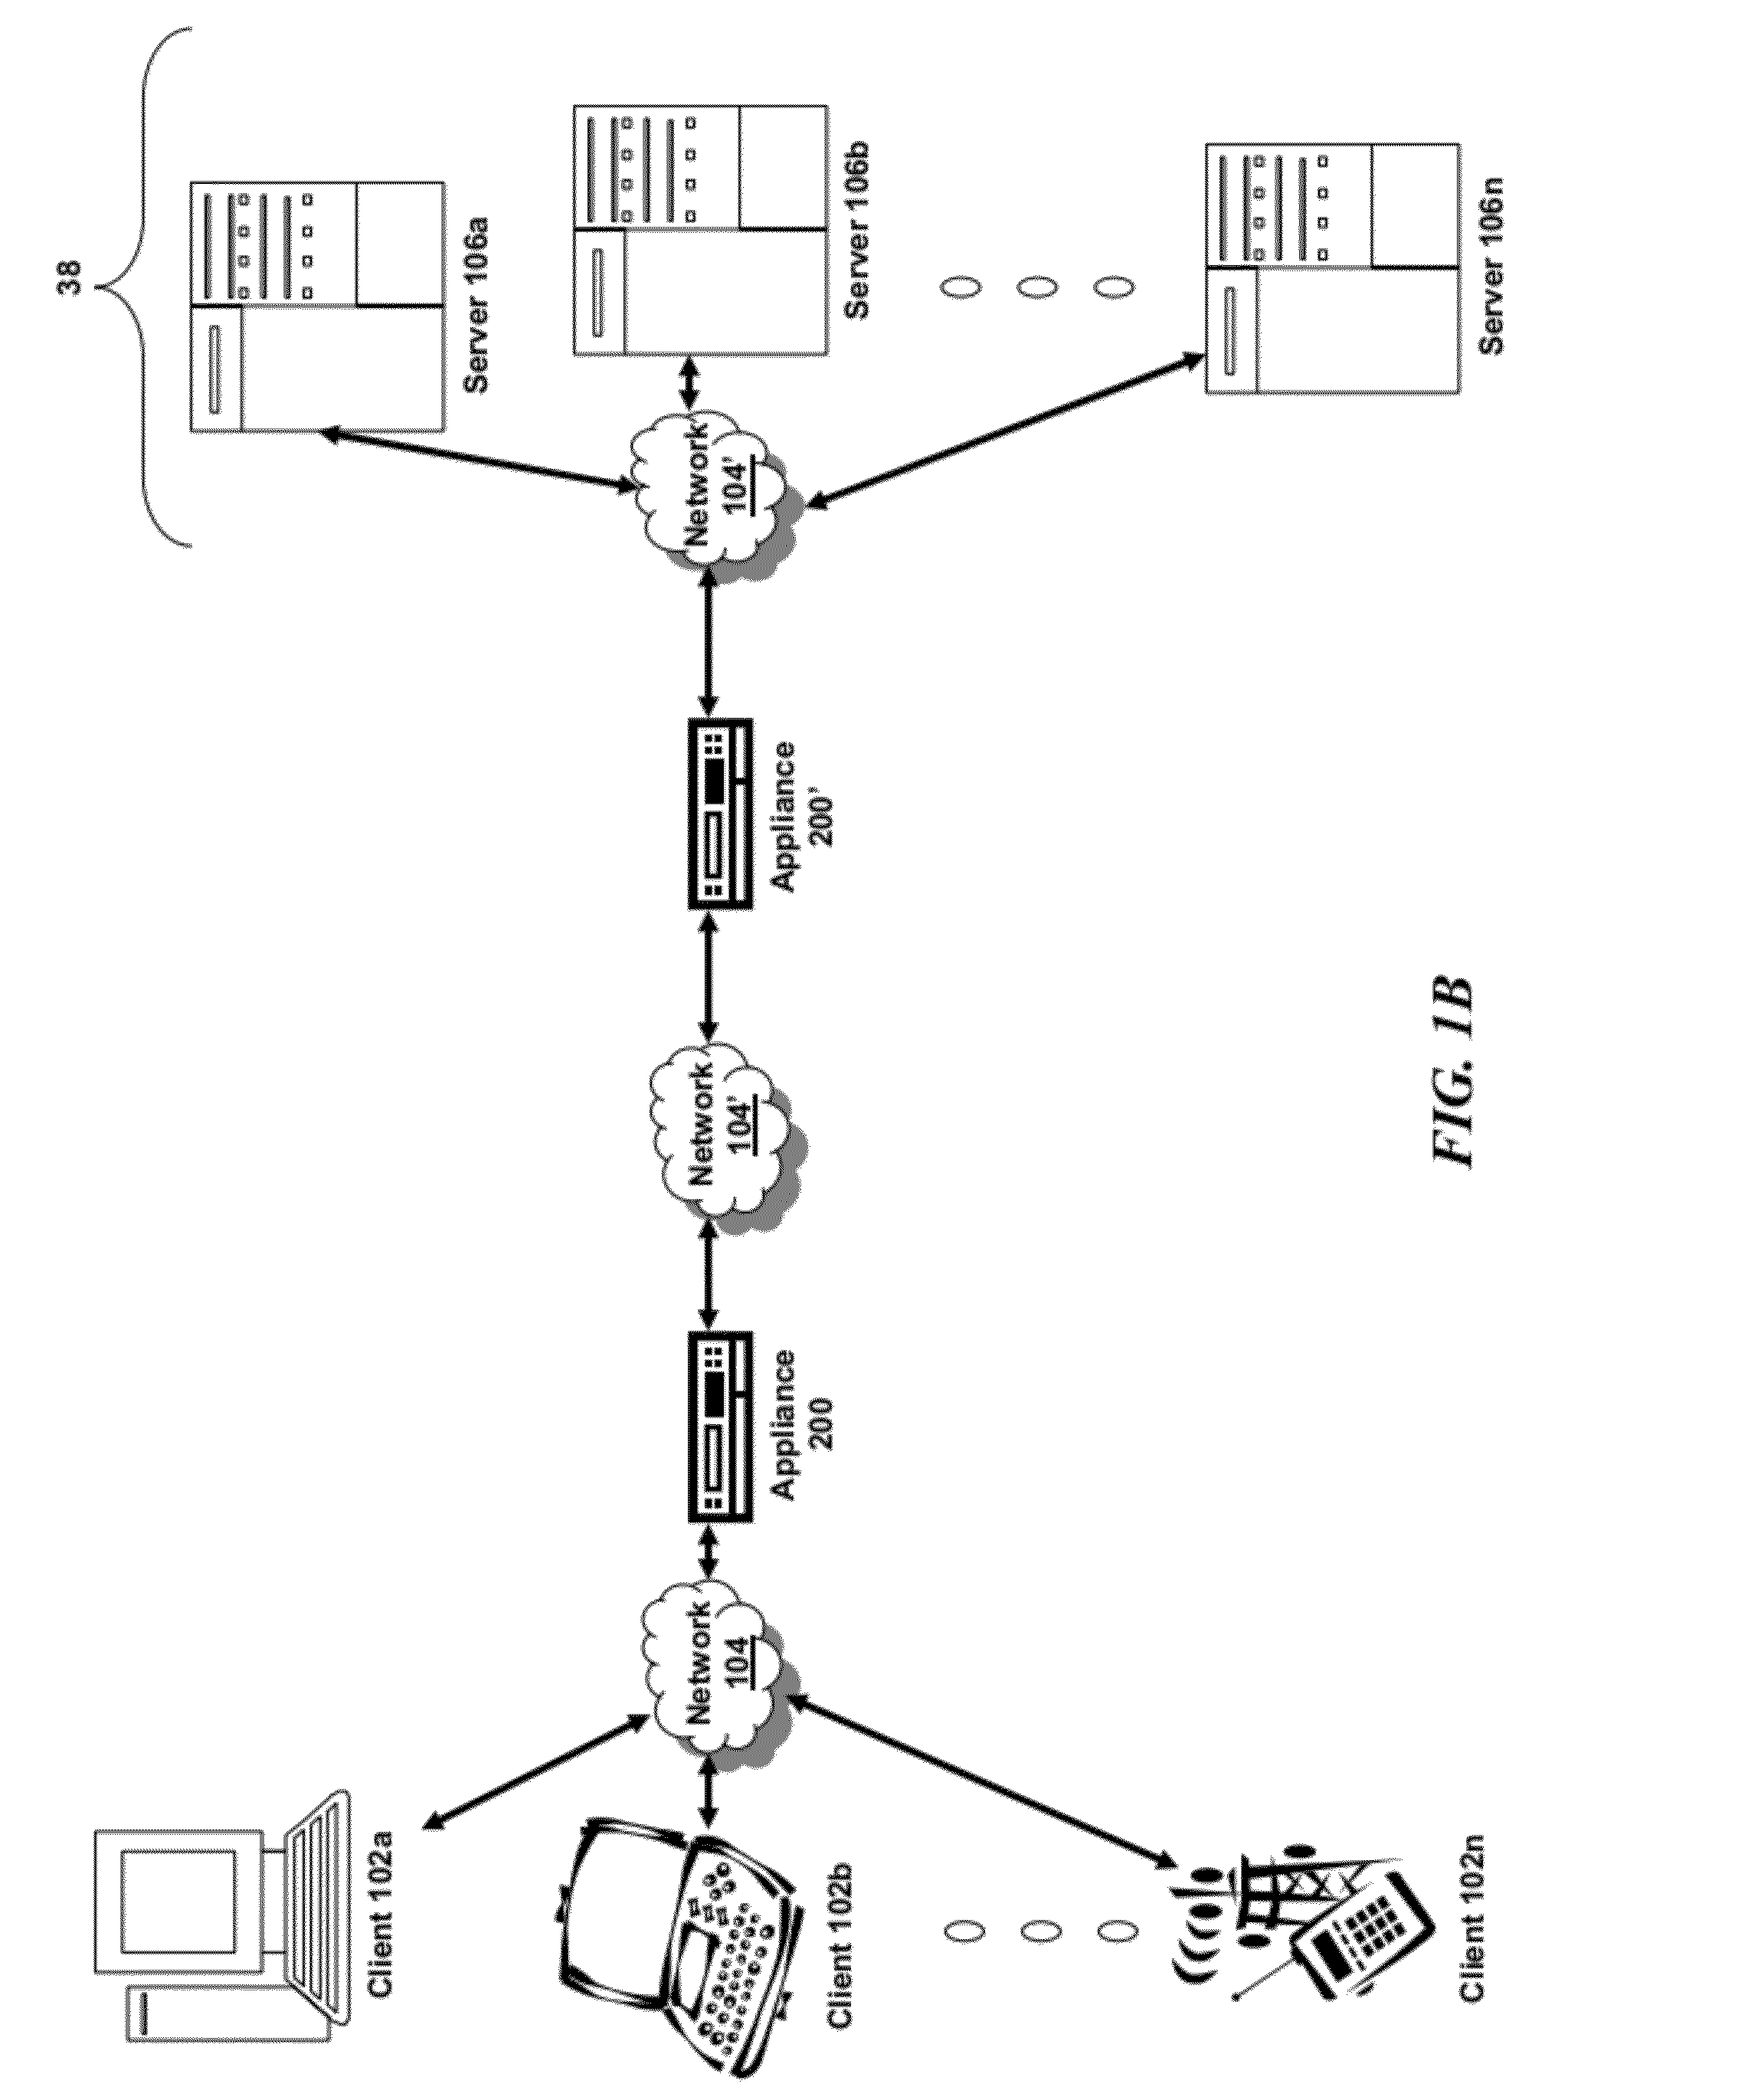 Systems and Methods for Policy Based Routing for Multiple Hops